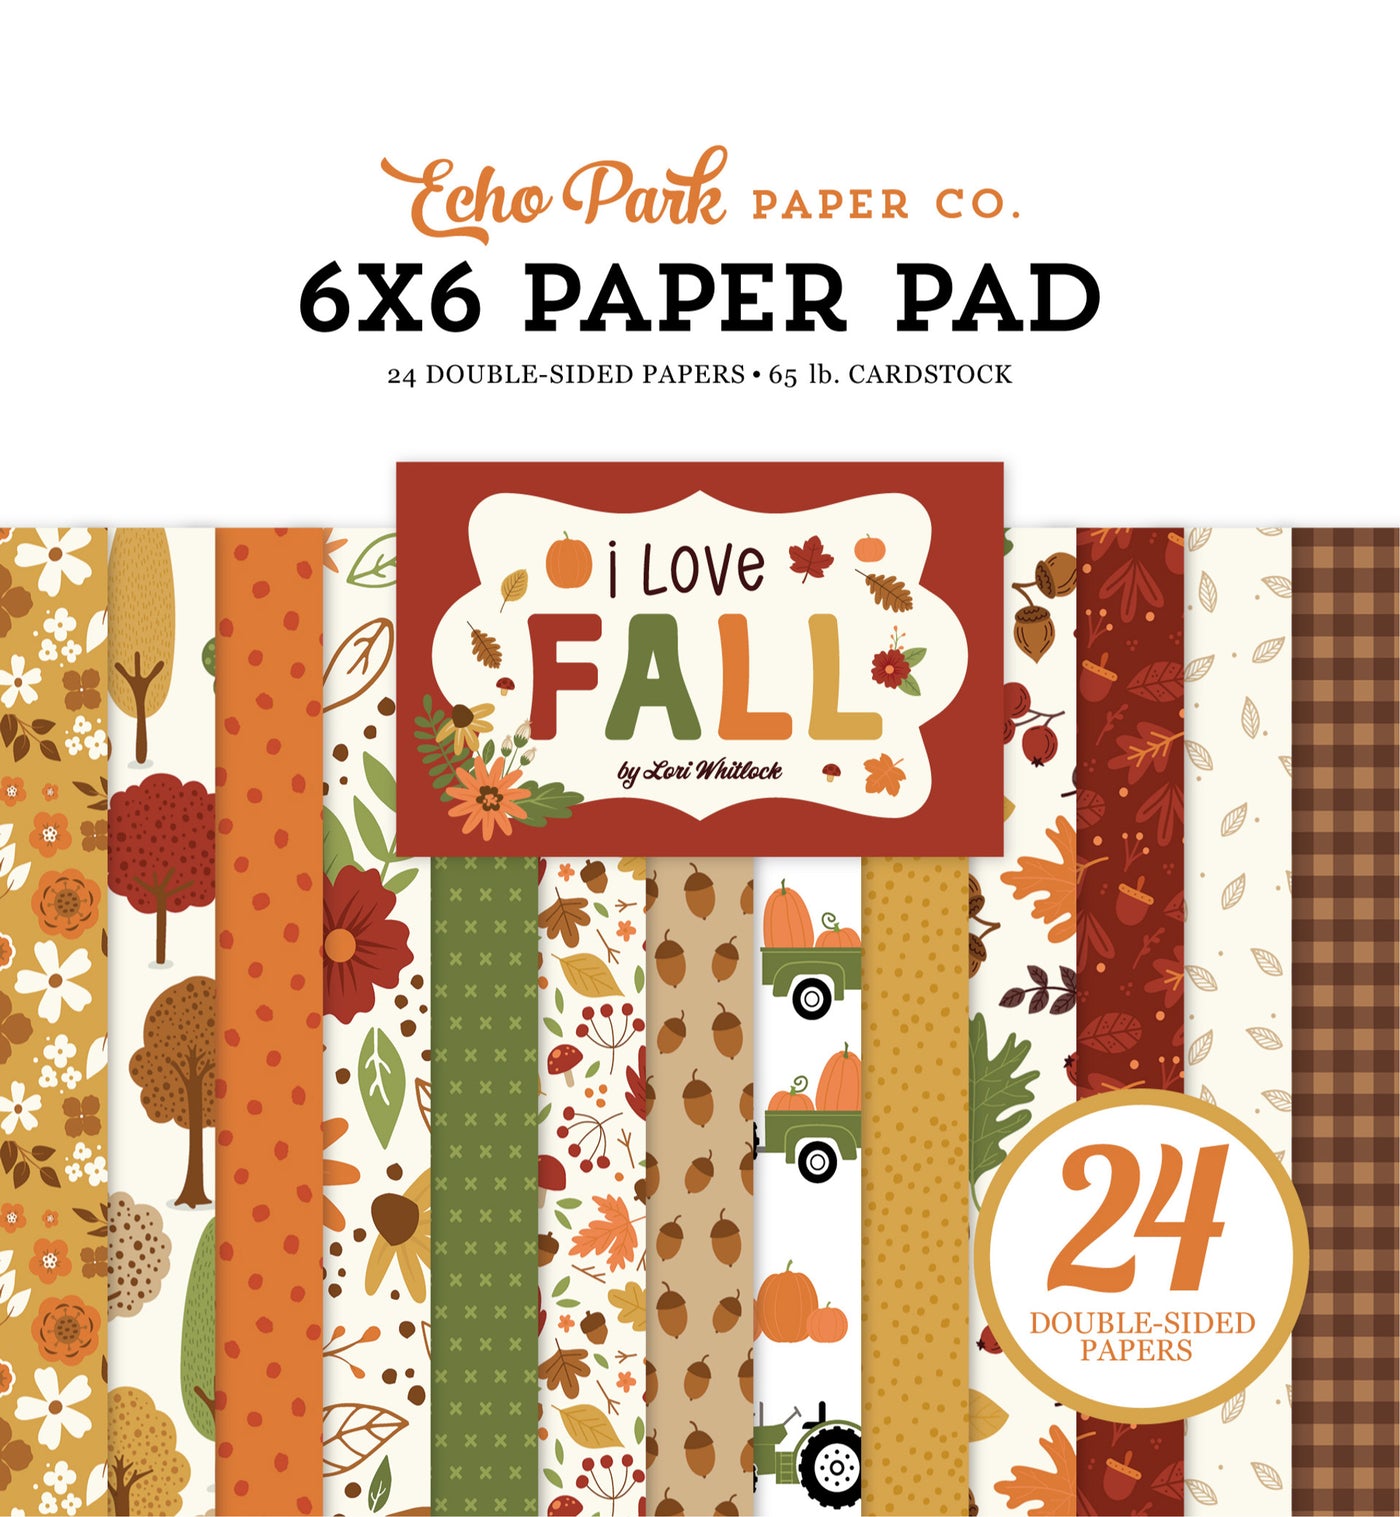 Autumn theme 6x6 pad with 24 double-sided pages for fun paper crafting. From Echo Park Paper Co.